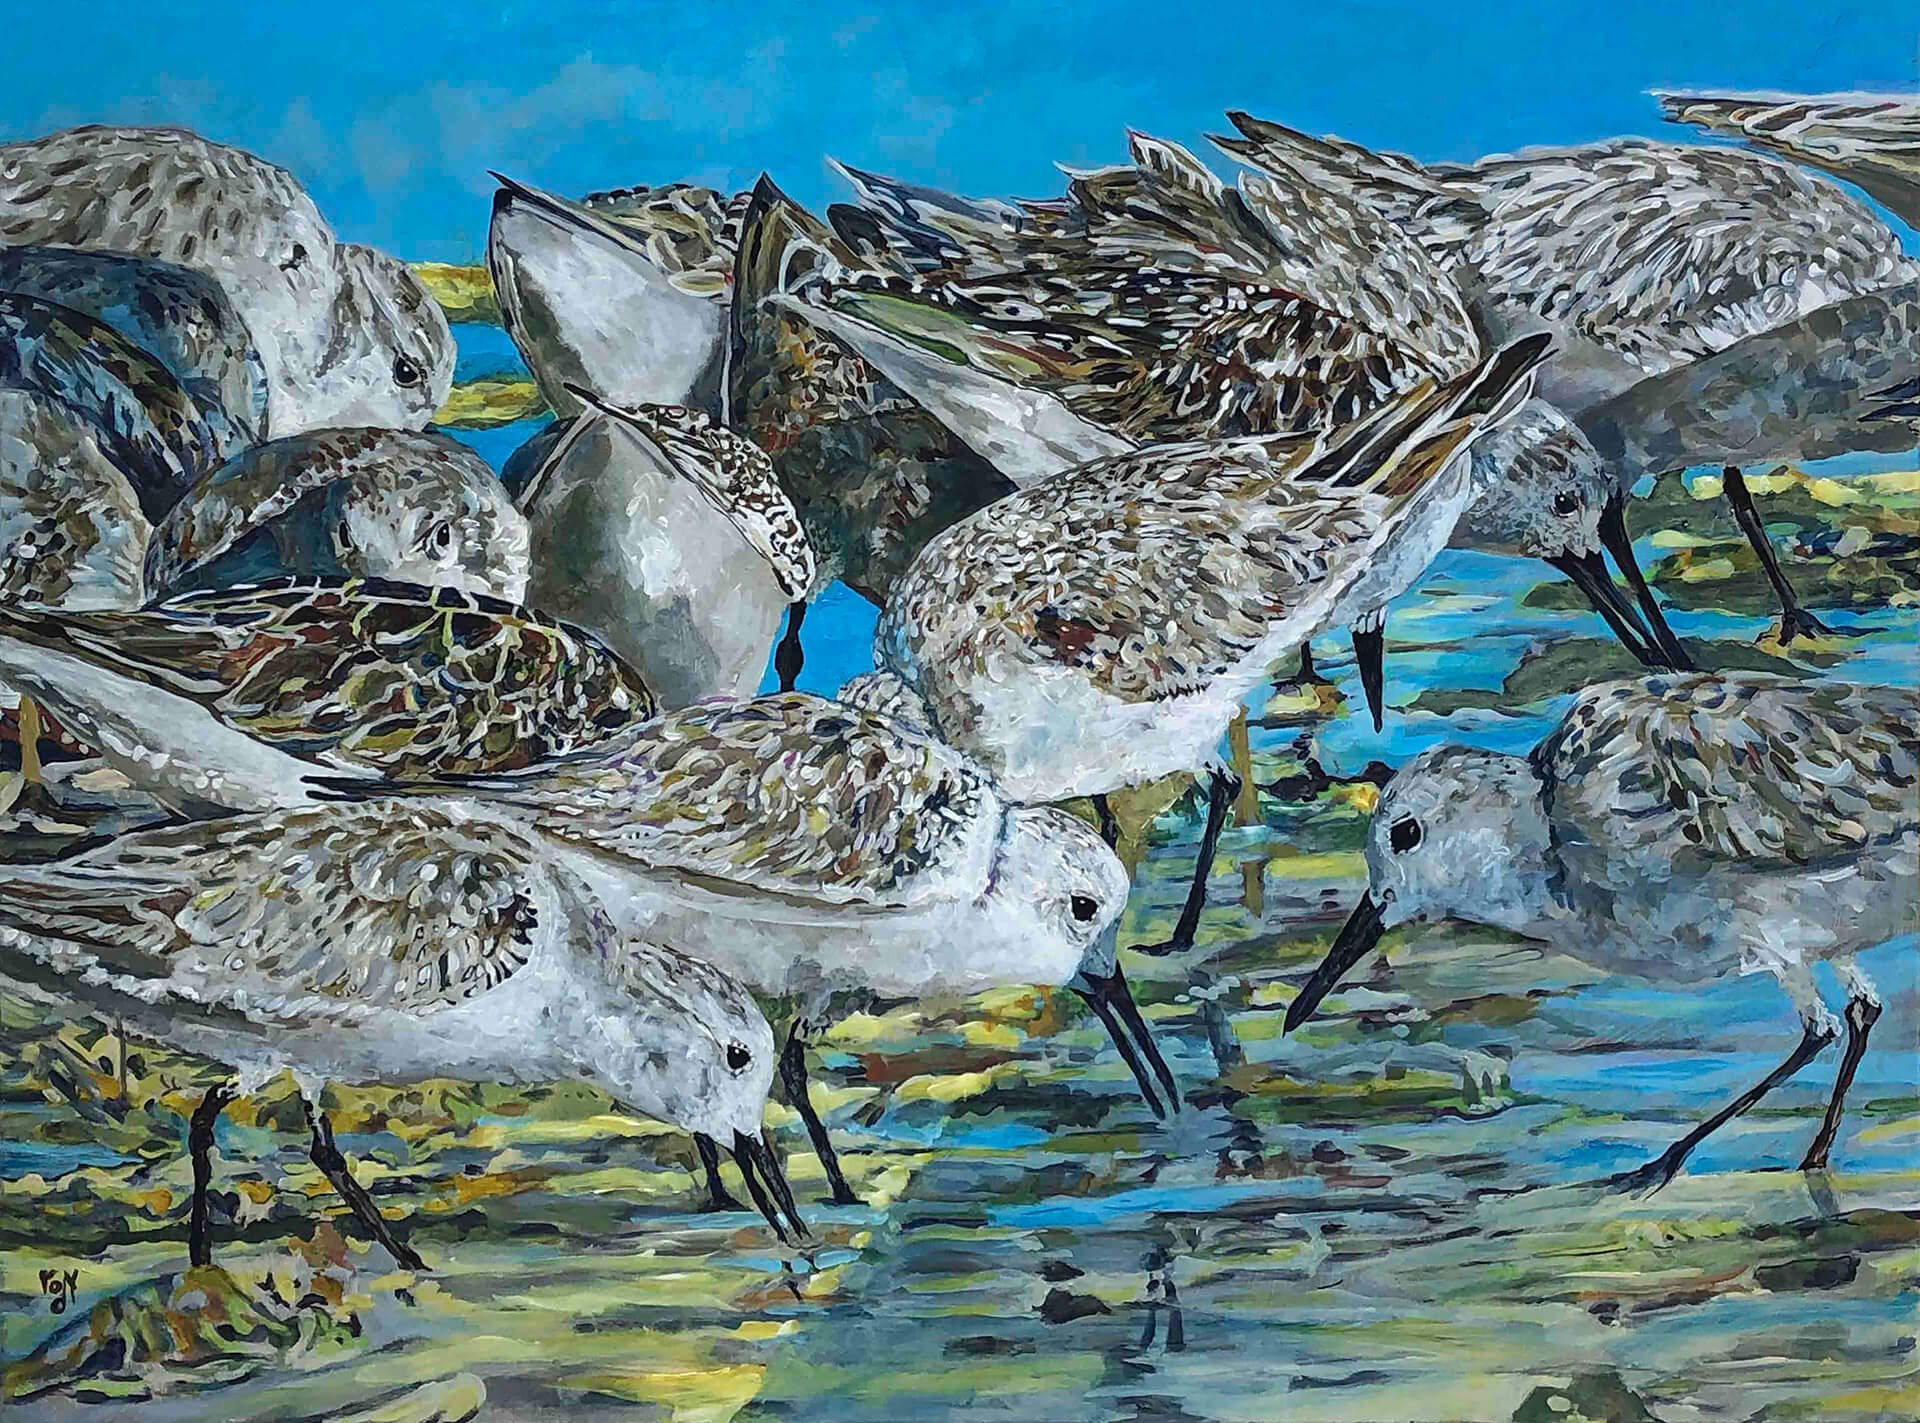 Keiths Sanderlings © 2022 Kim Rody. All Rights Reserved.